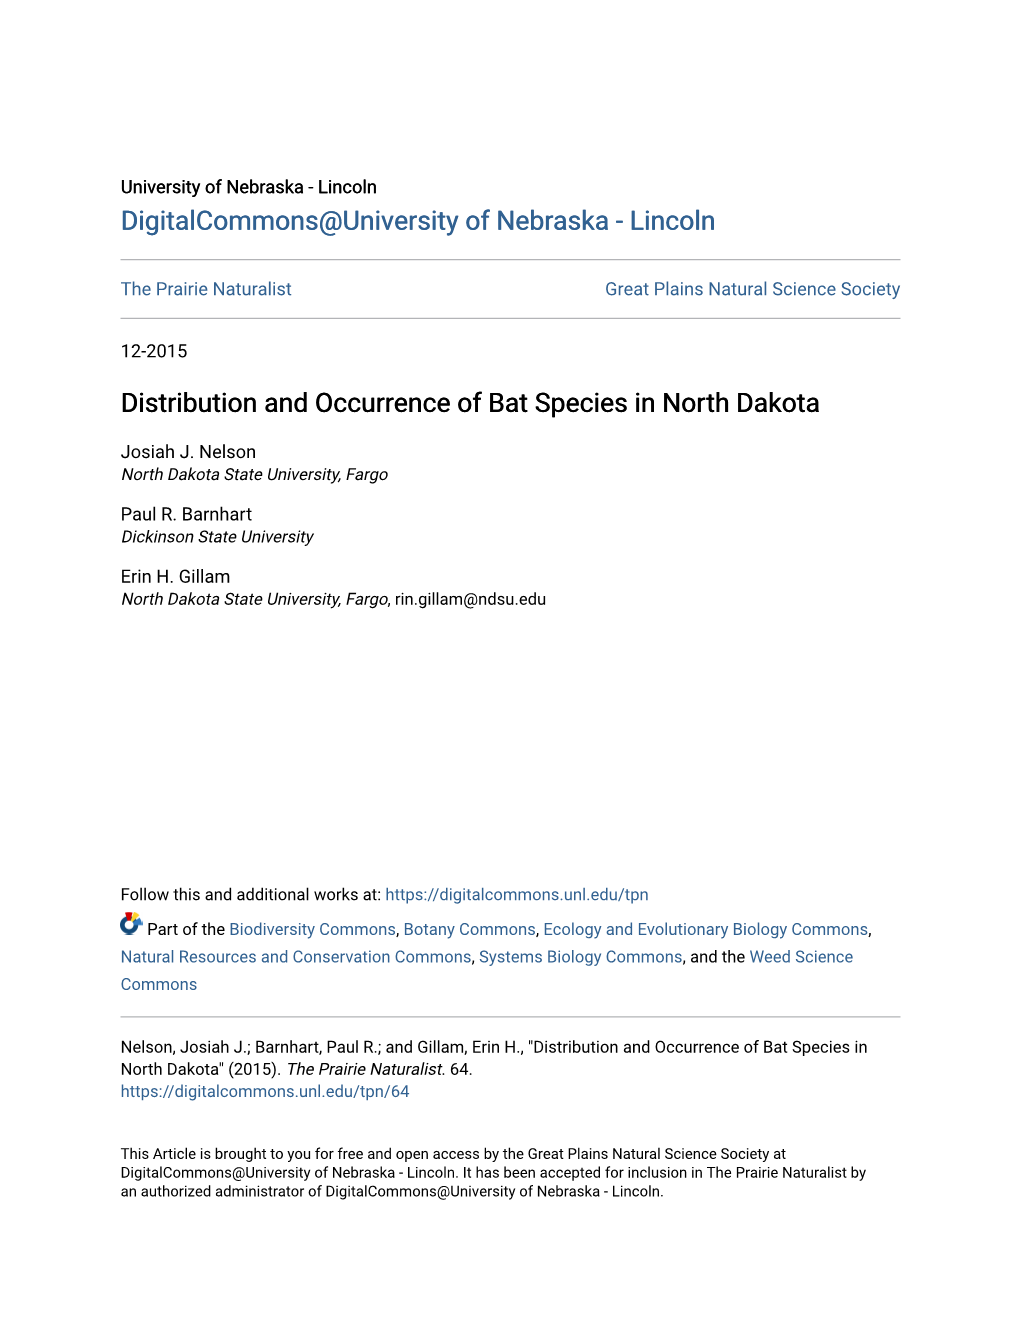 Distribution and Occurrence of Bat Species in North Dakota